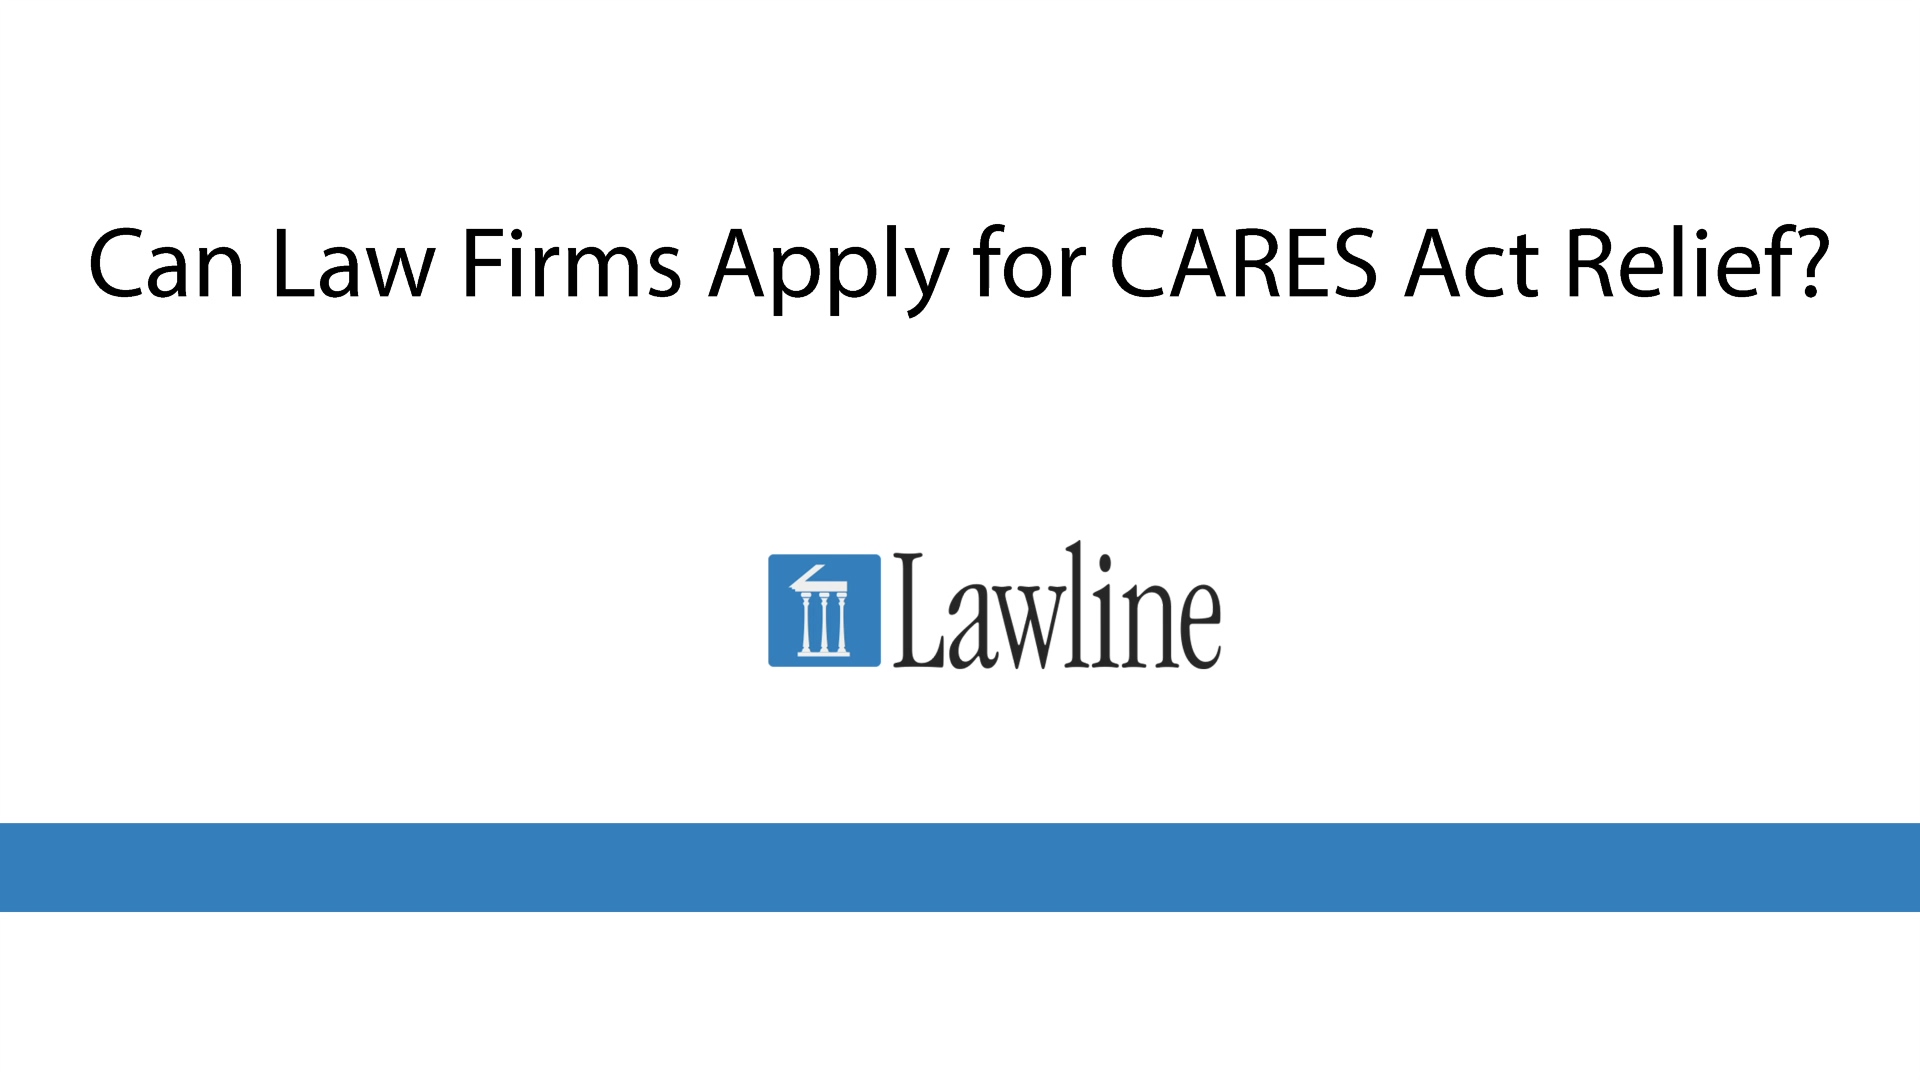 Lawline Short- Can Law Firms Apply for Relief Under the CARES Act Edit